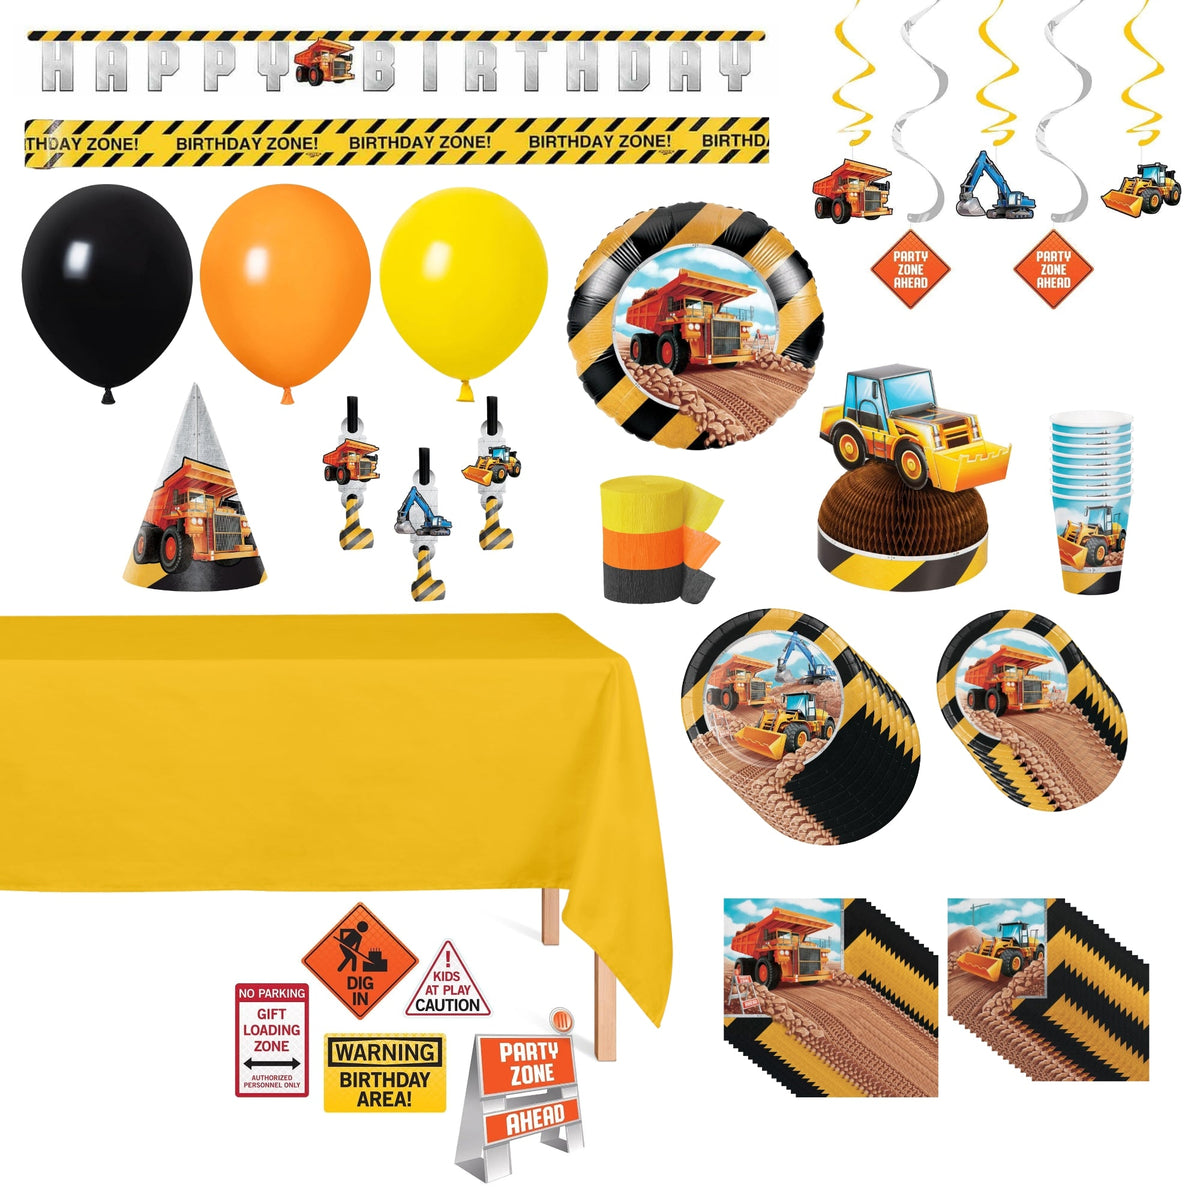 Party Expert Kids Birthday Big Dig Construction Standard Birthday Party Kit